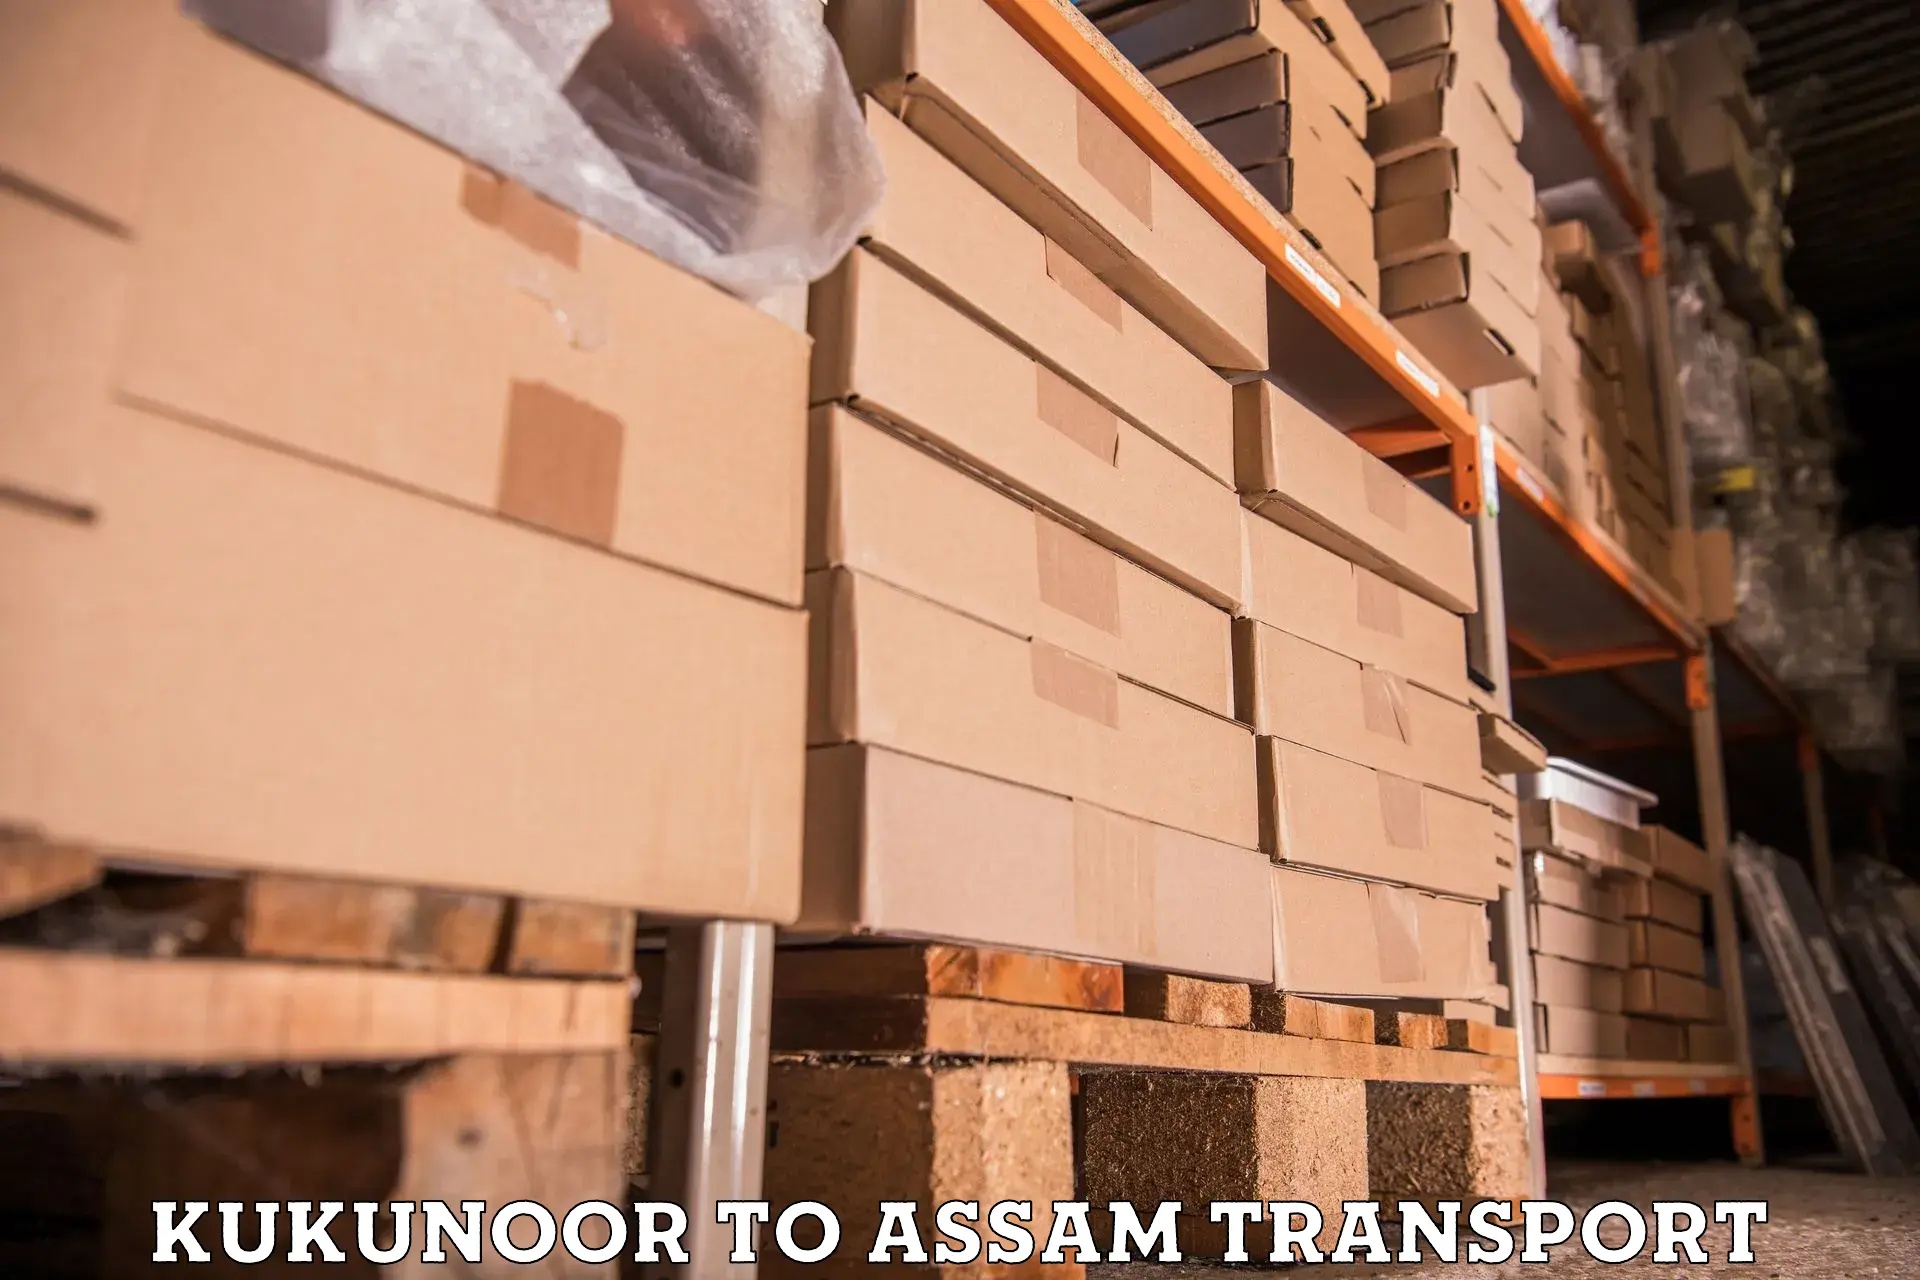 Part load transport service in India Kukunoor to Lala Assam